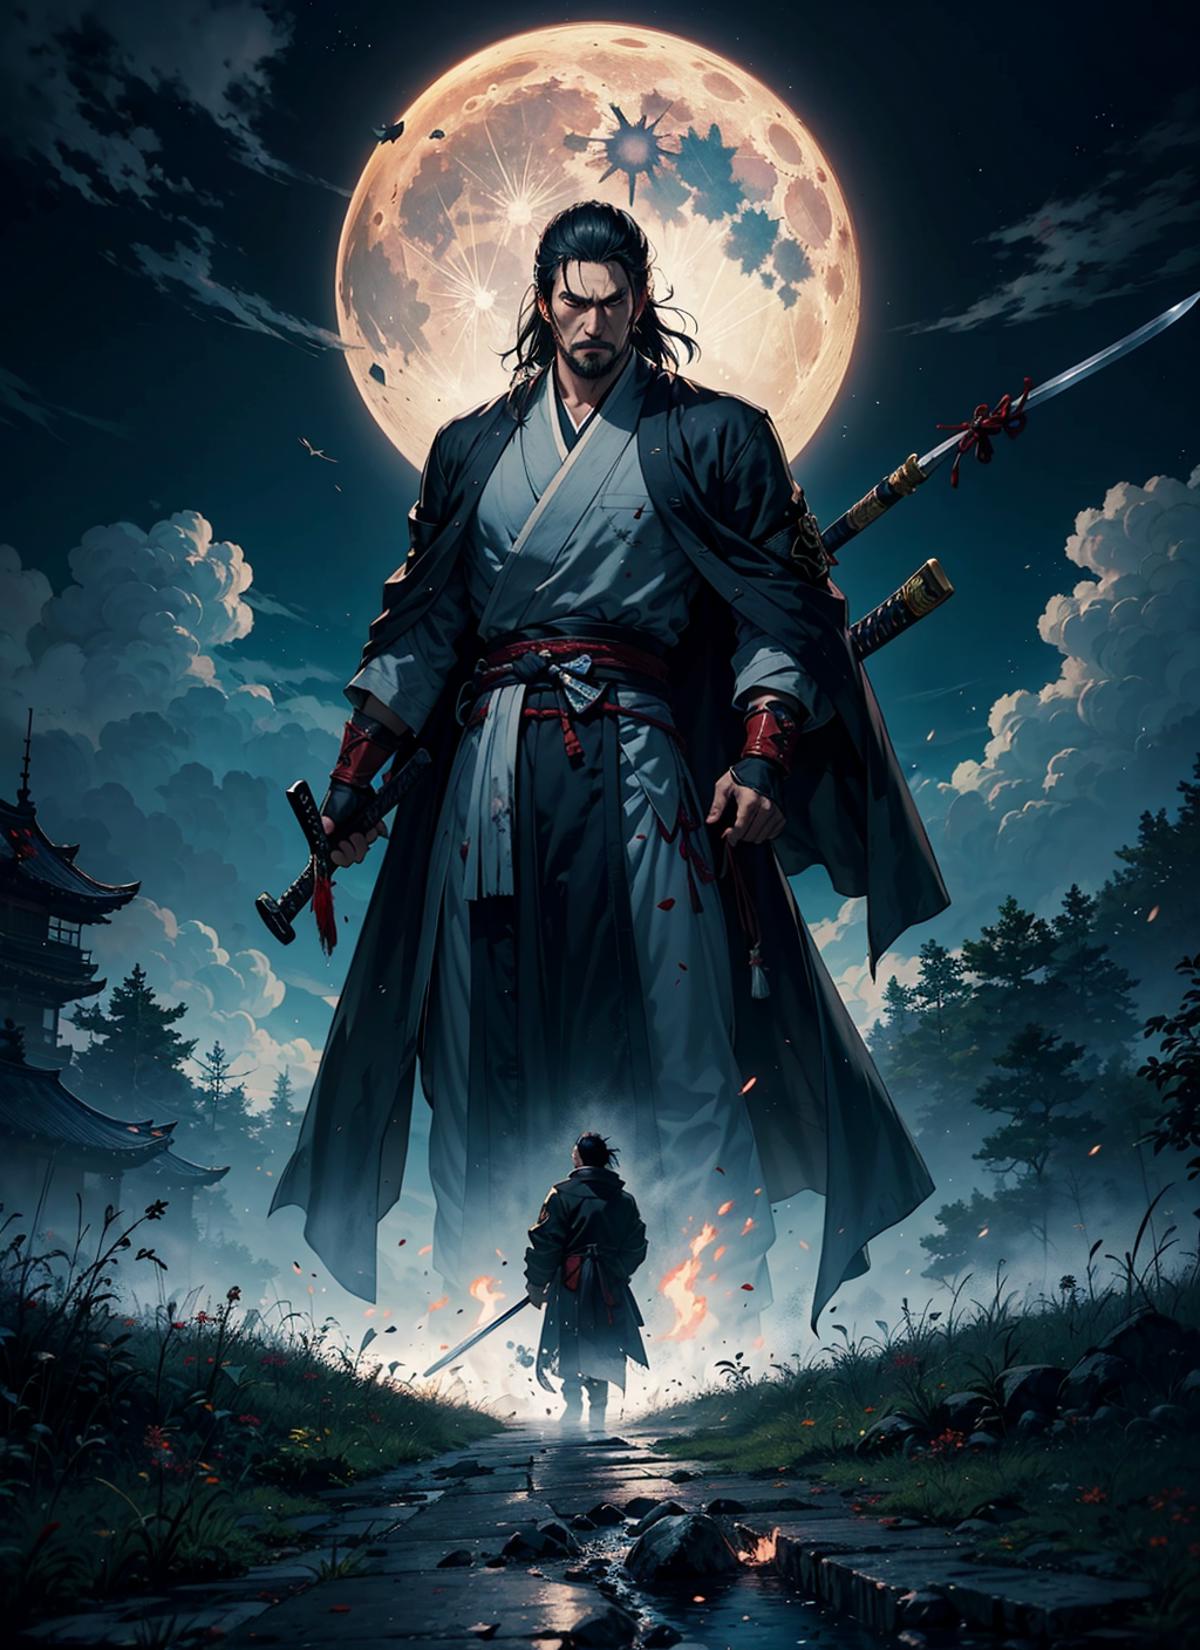 Samurai with swords standing on top of a hill at night, under a full moon.